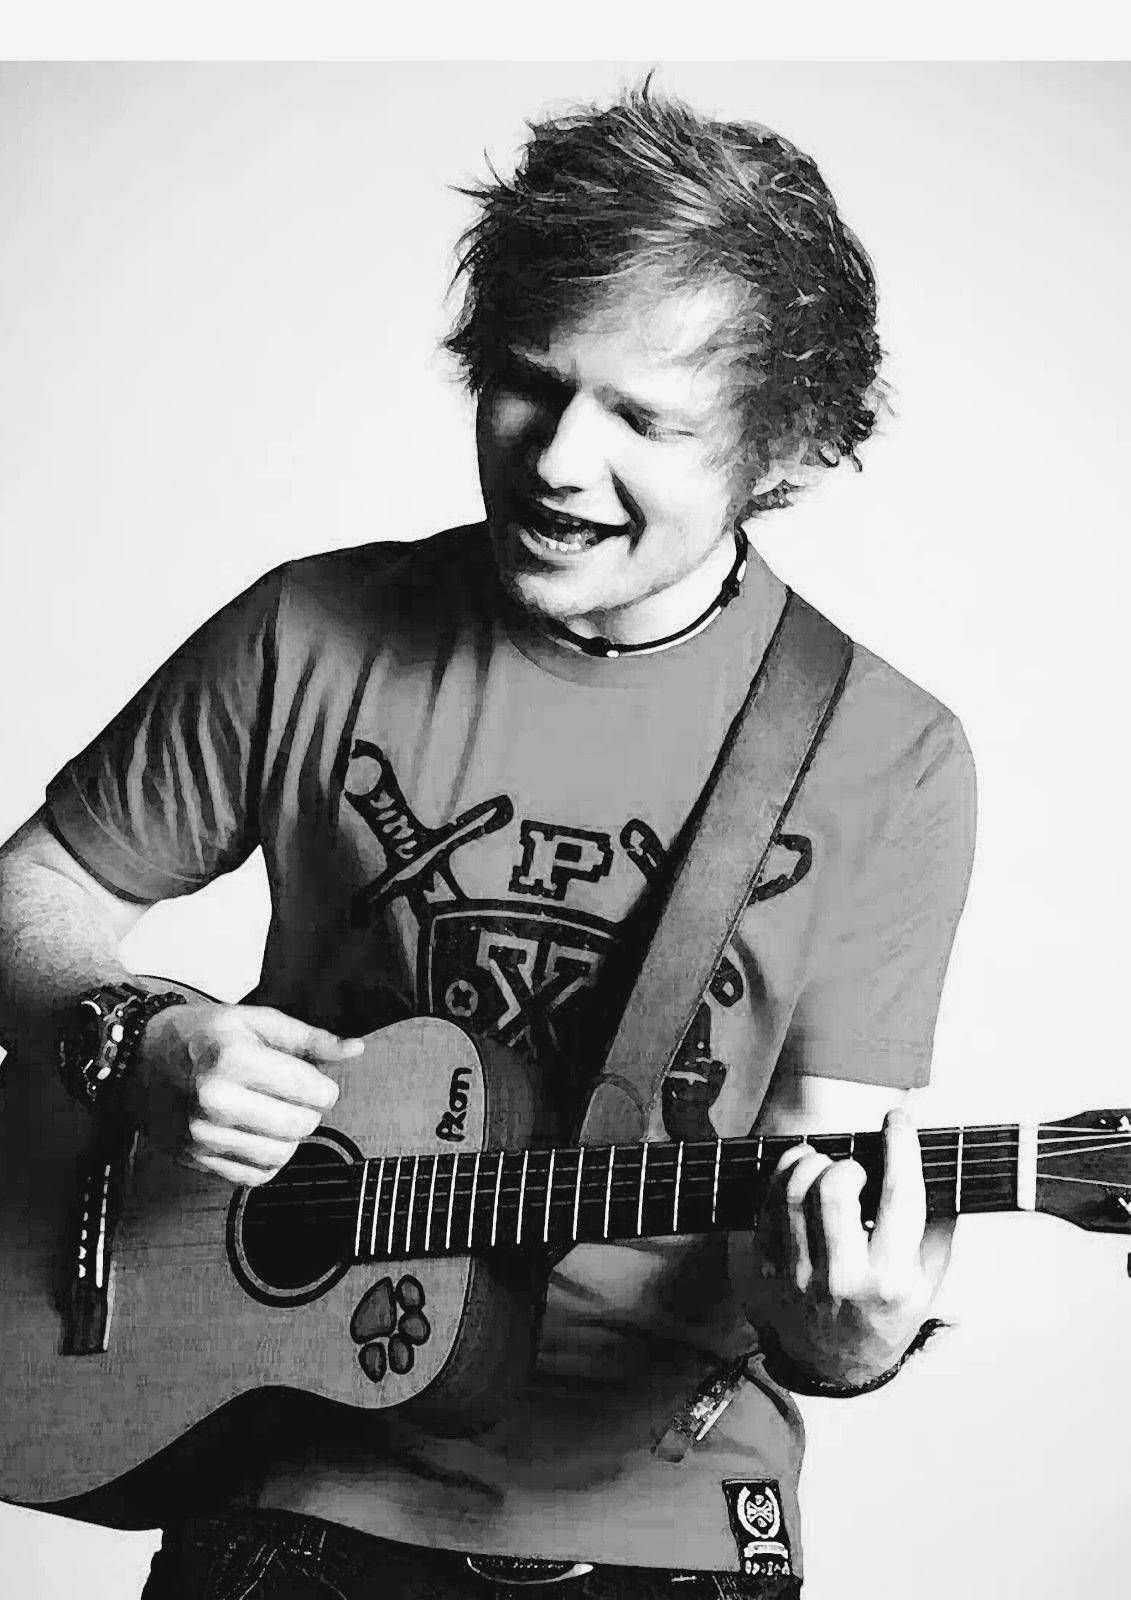 Singer-songwriter Ed Sheeran Makes A Statement In Black And White. Background